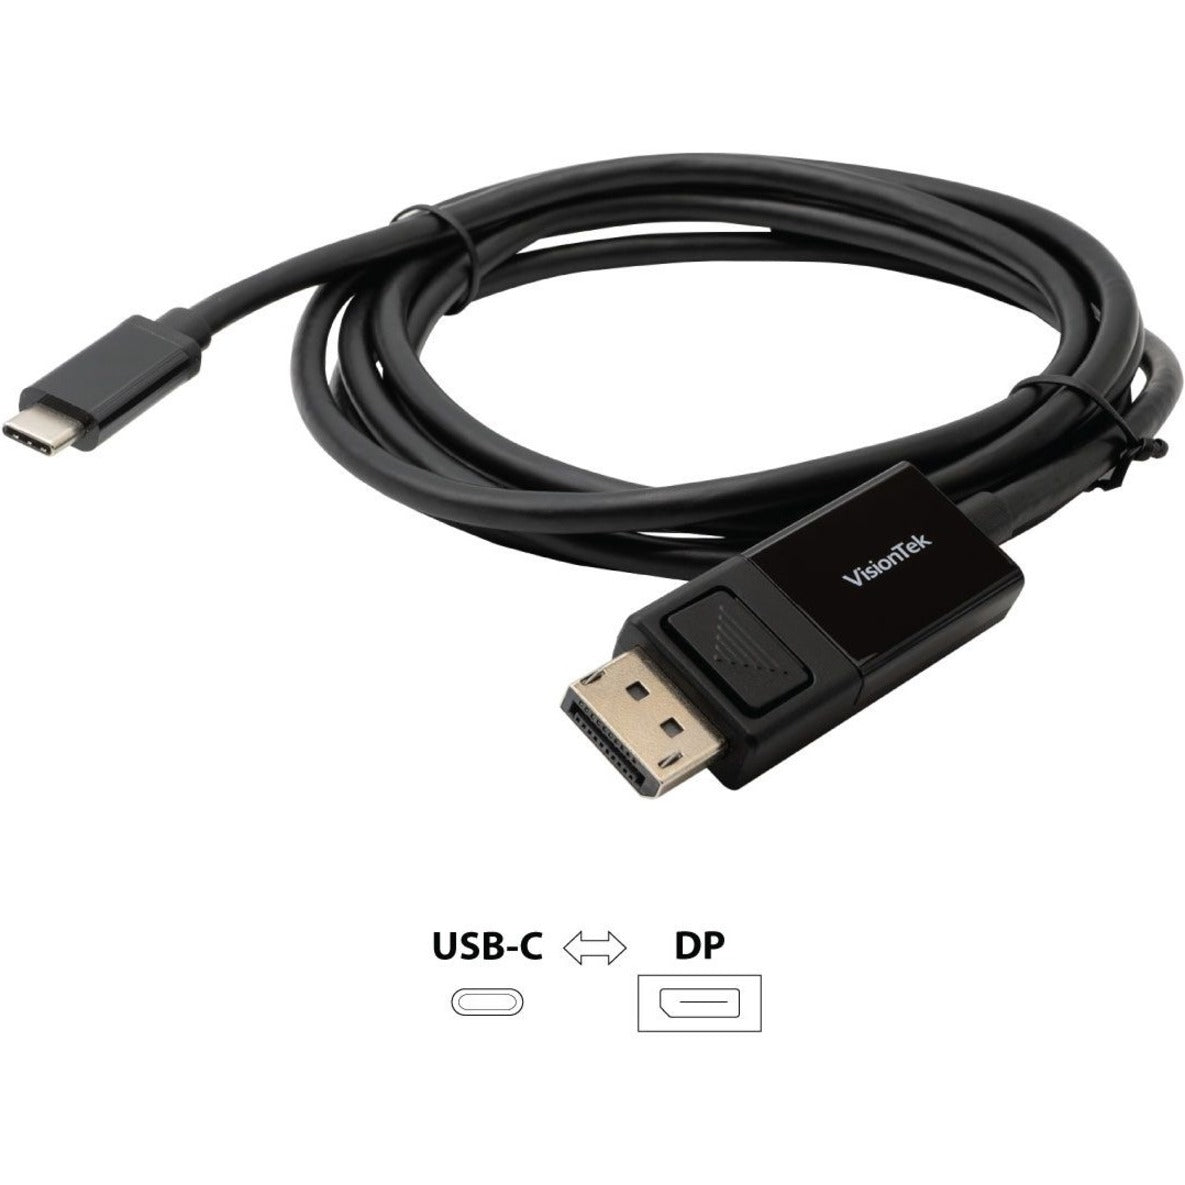 VisionTek 901288 USB-C to DisplayPort 1.4 Bi-Directional 2M Active Cable (M/M), Plug & Play, 3840 x 2160 Supported Resolution